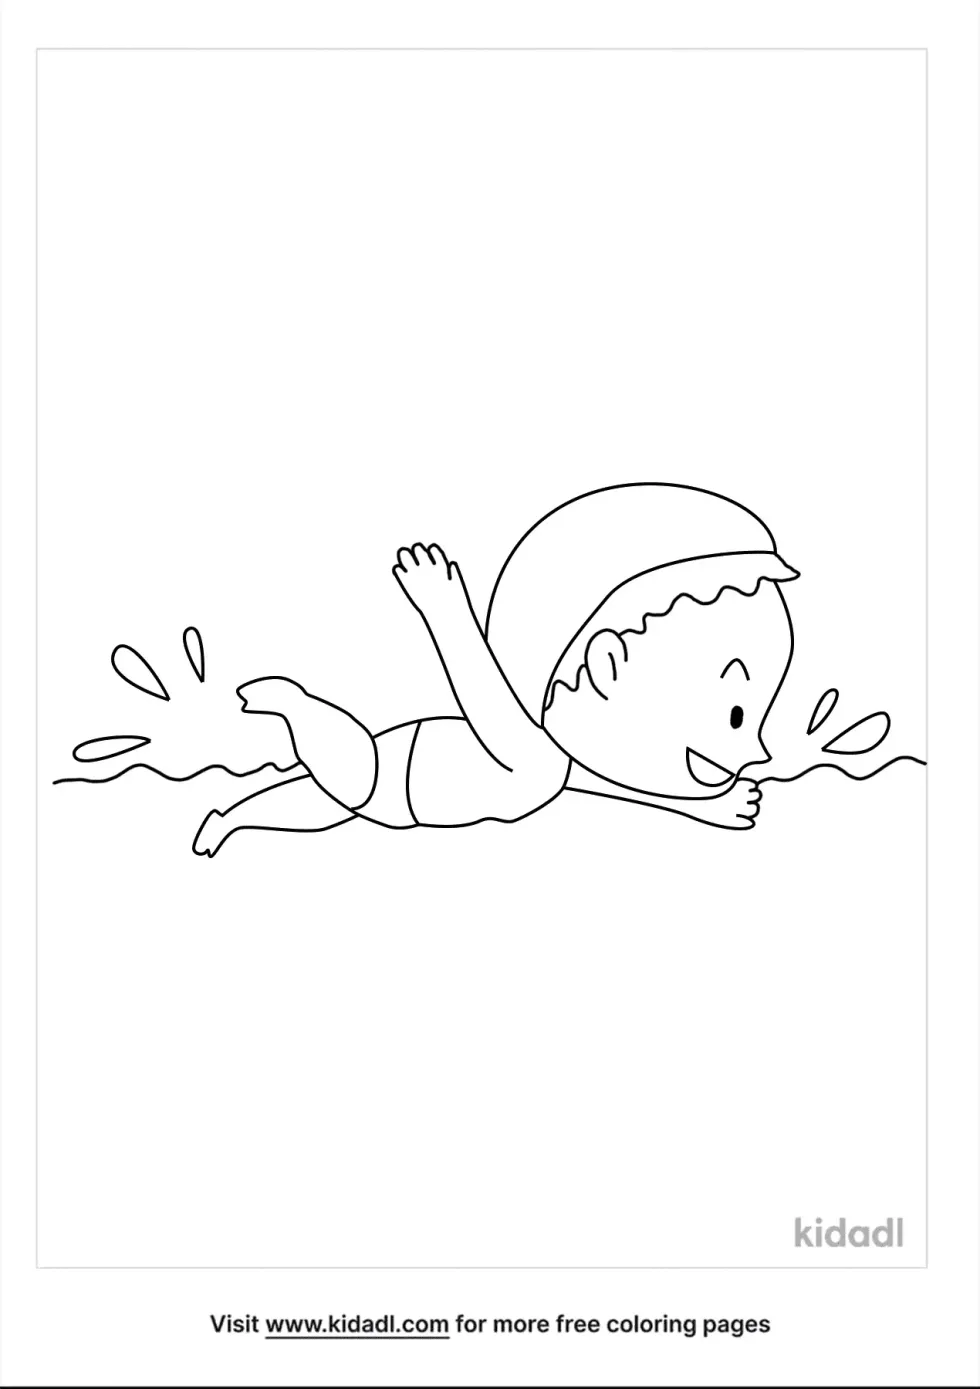 Cartoon Child Swimming Coloring Page